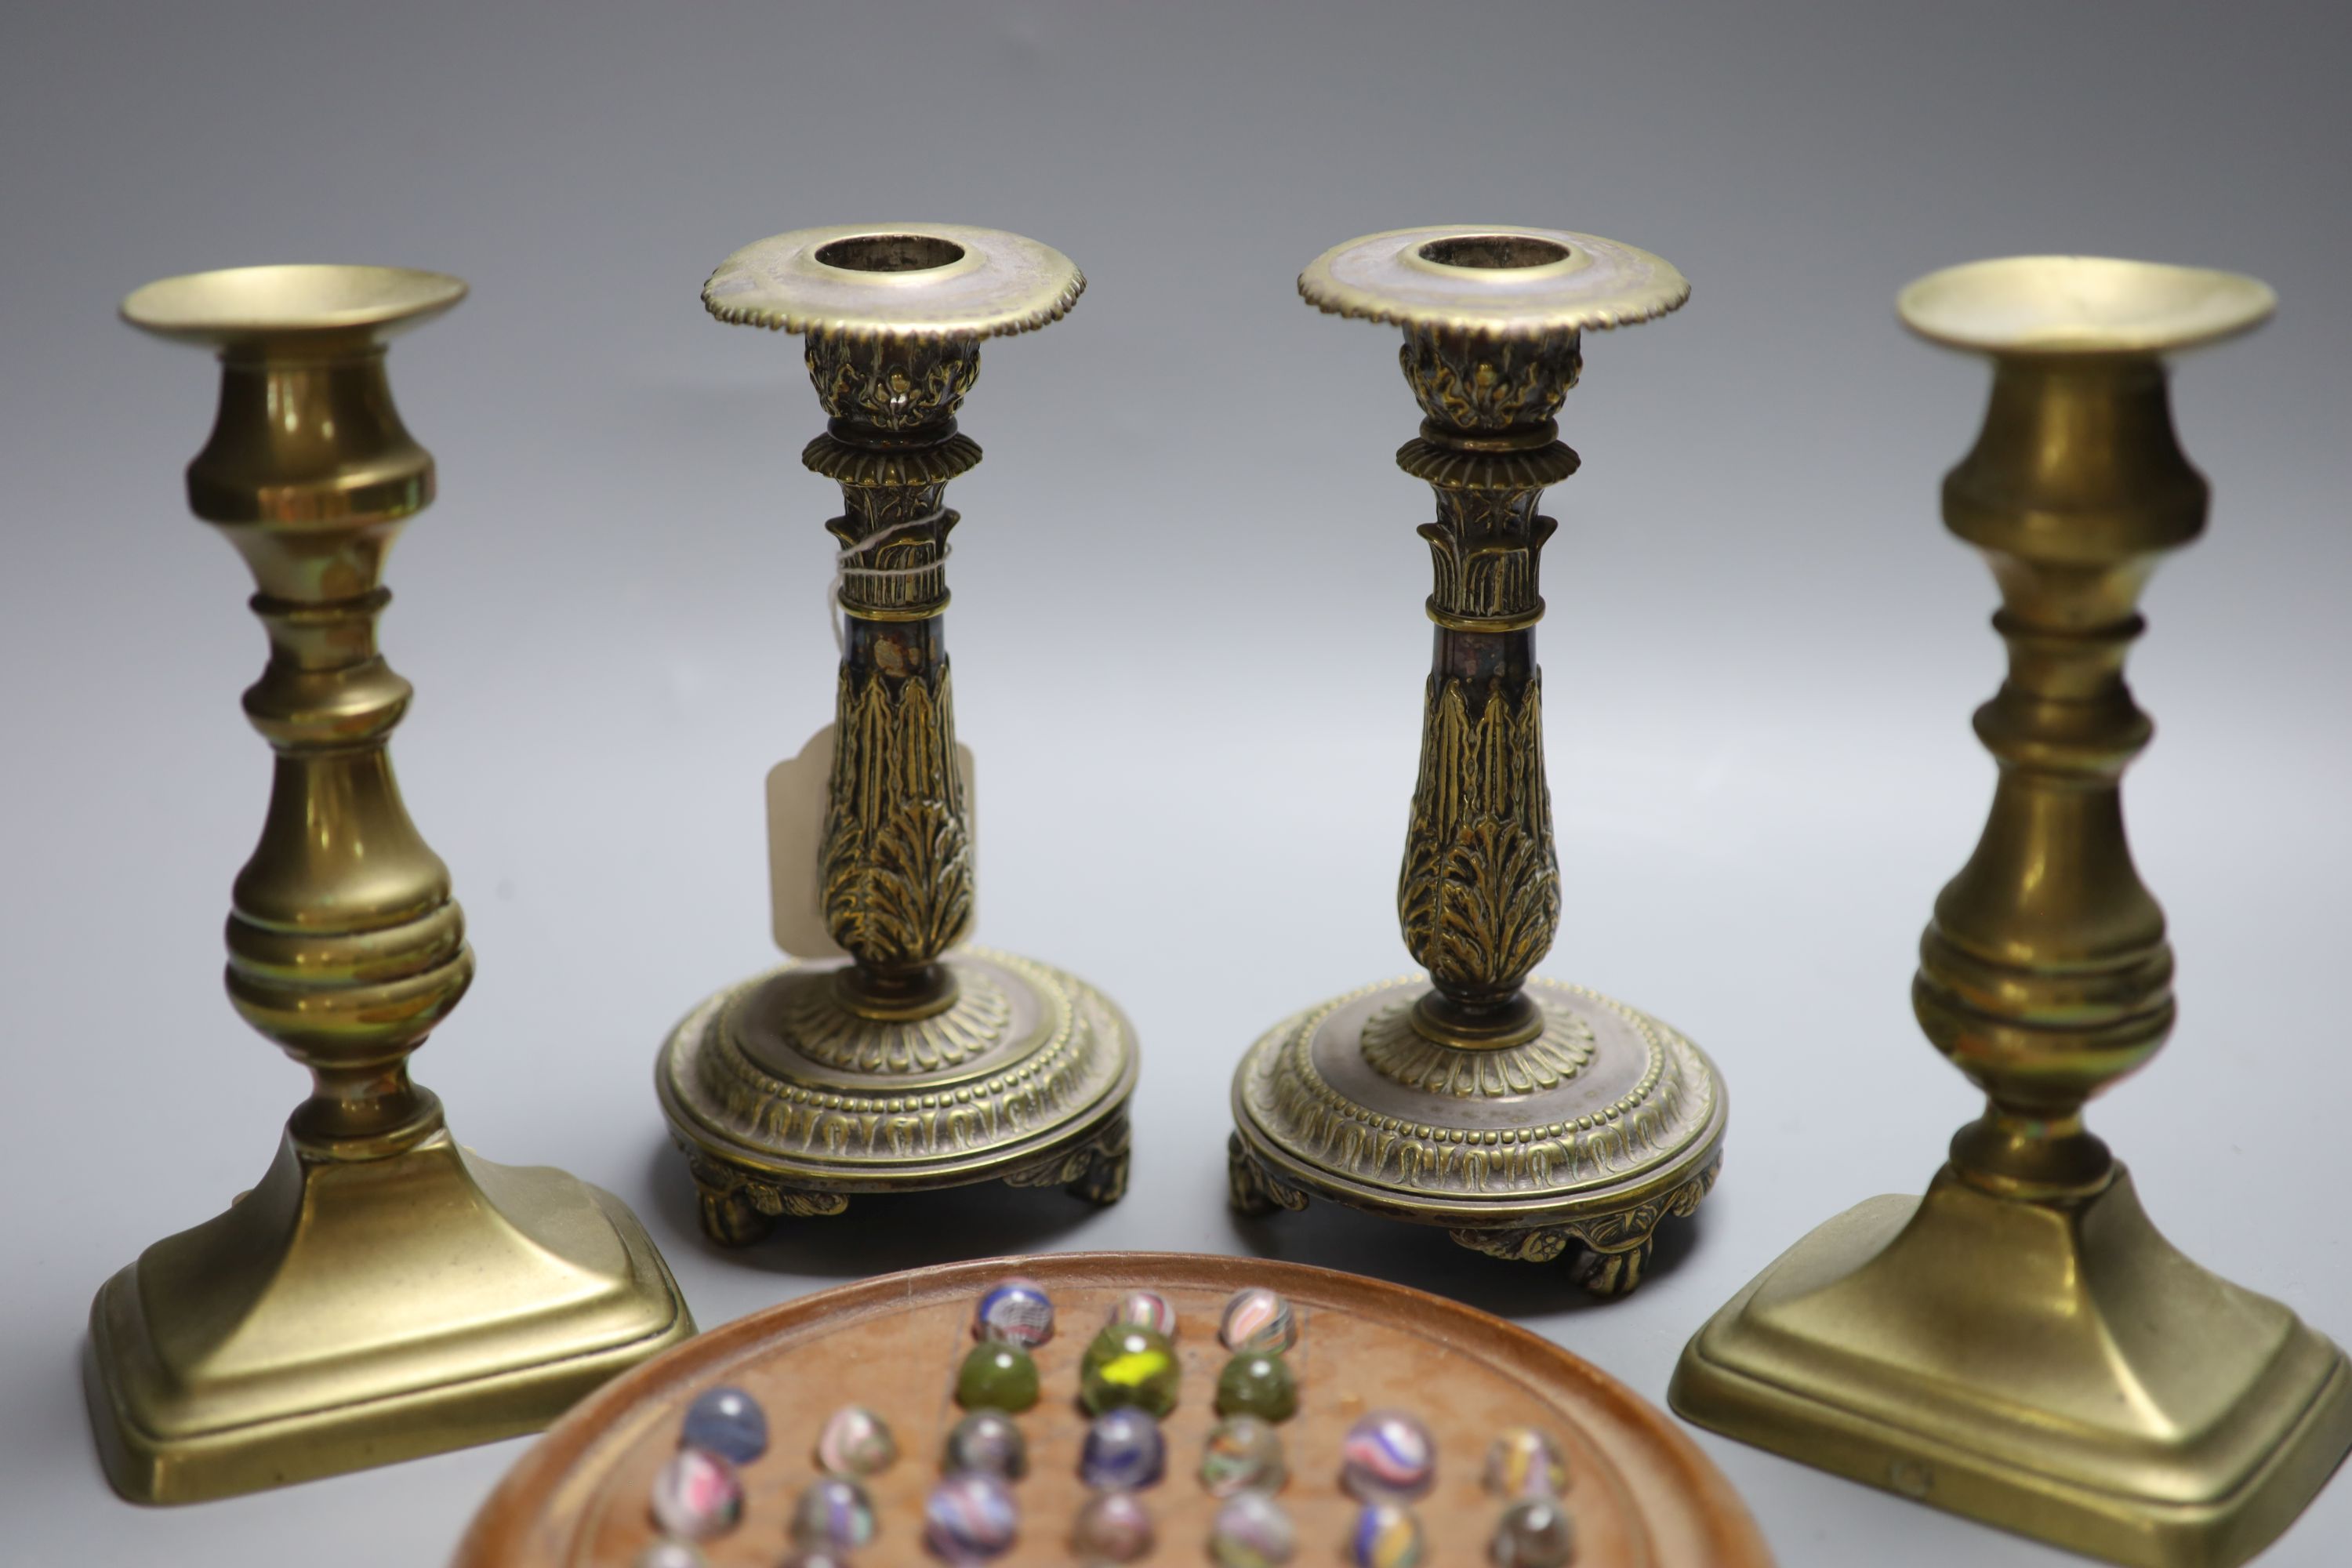 Two pairs of brass candlesticks and a solitaire board with marbles